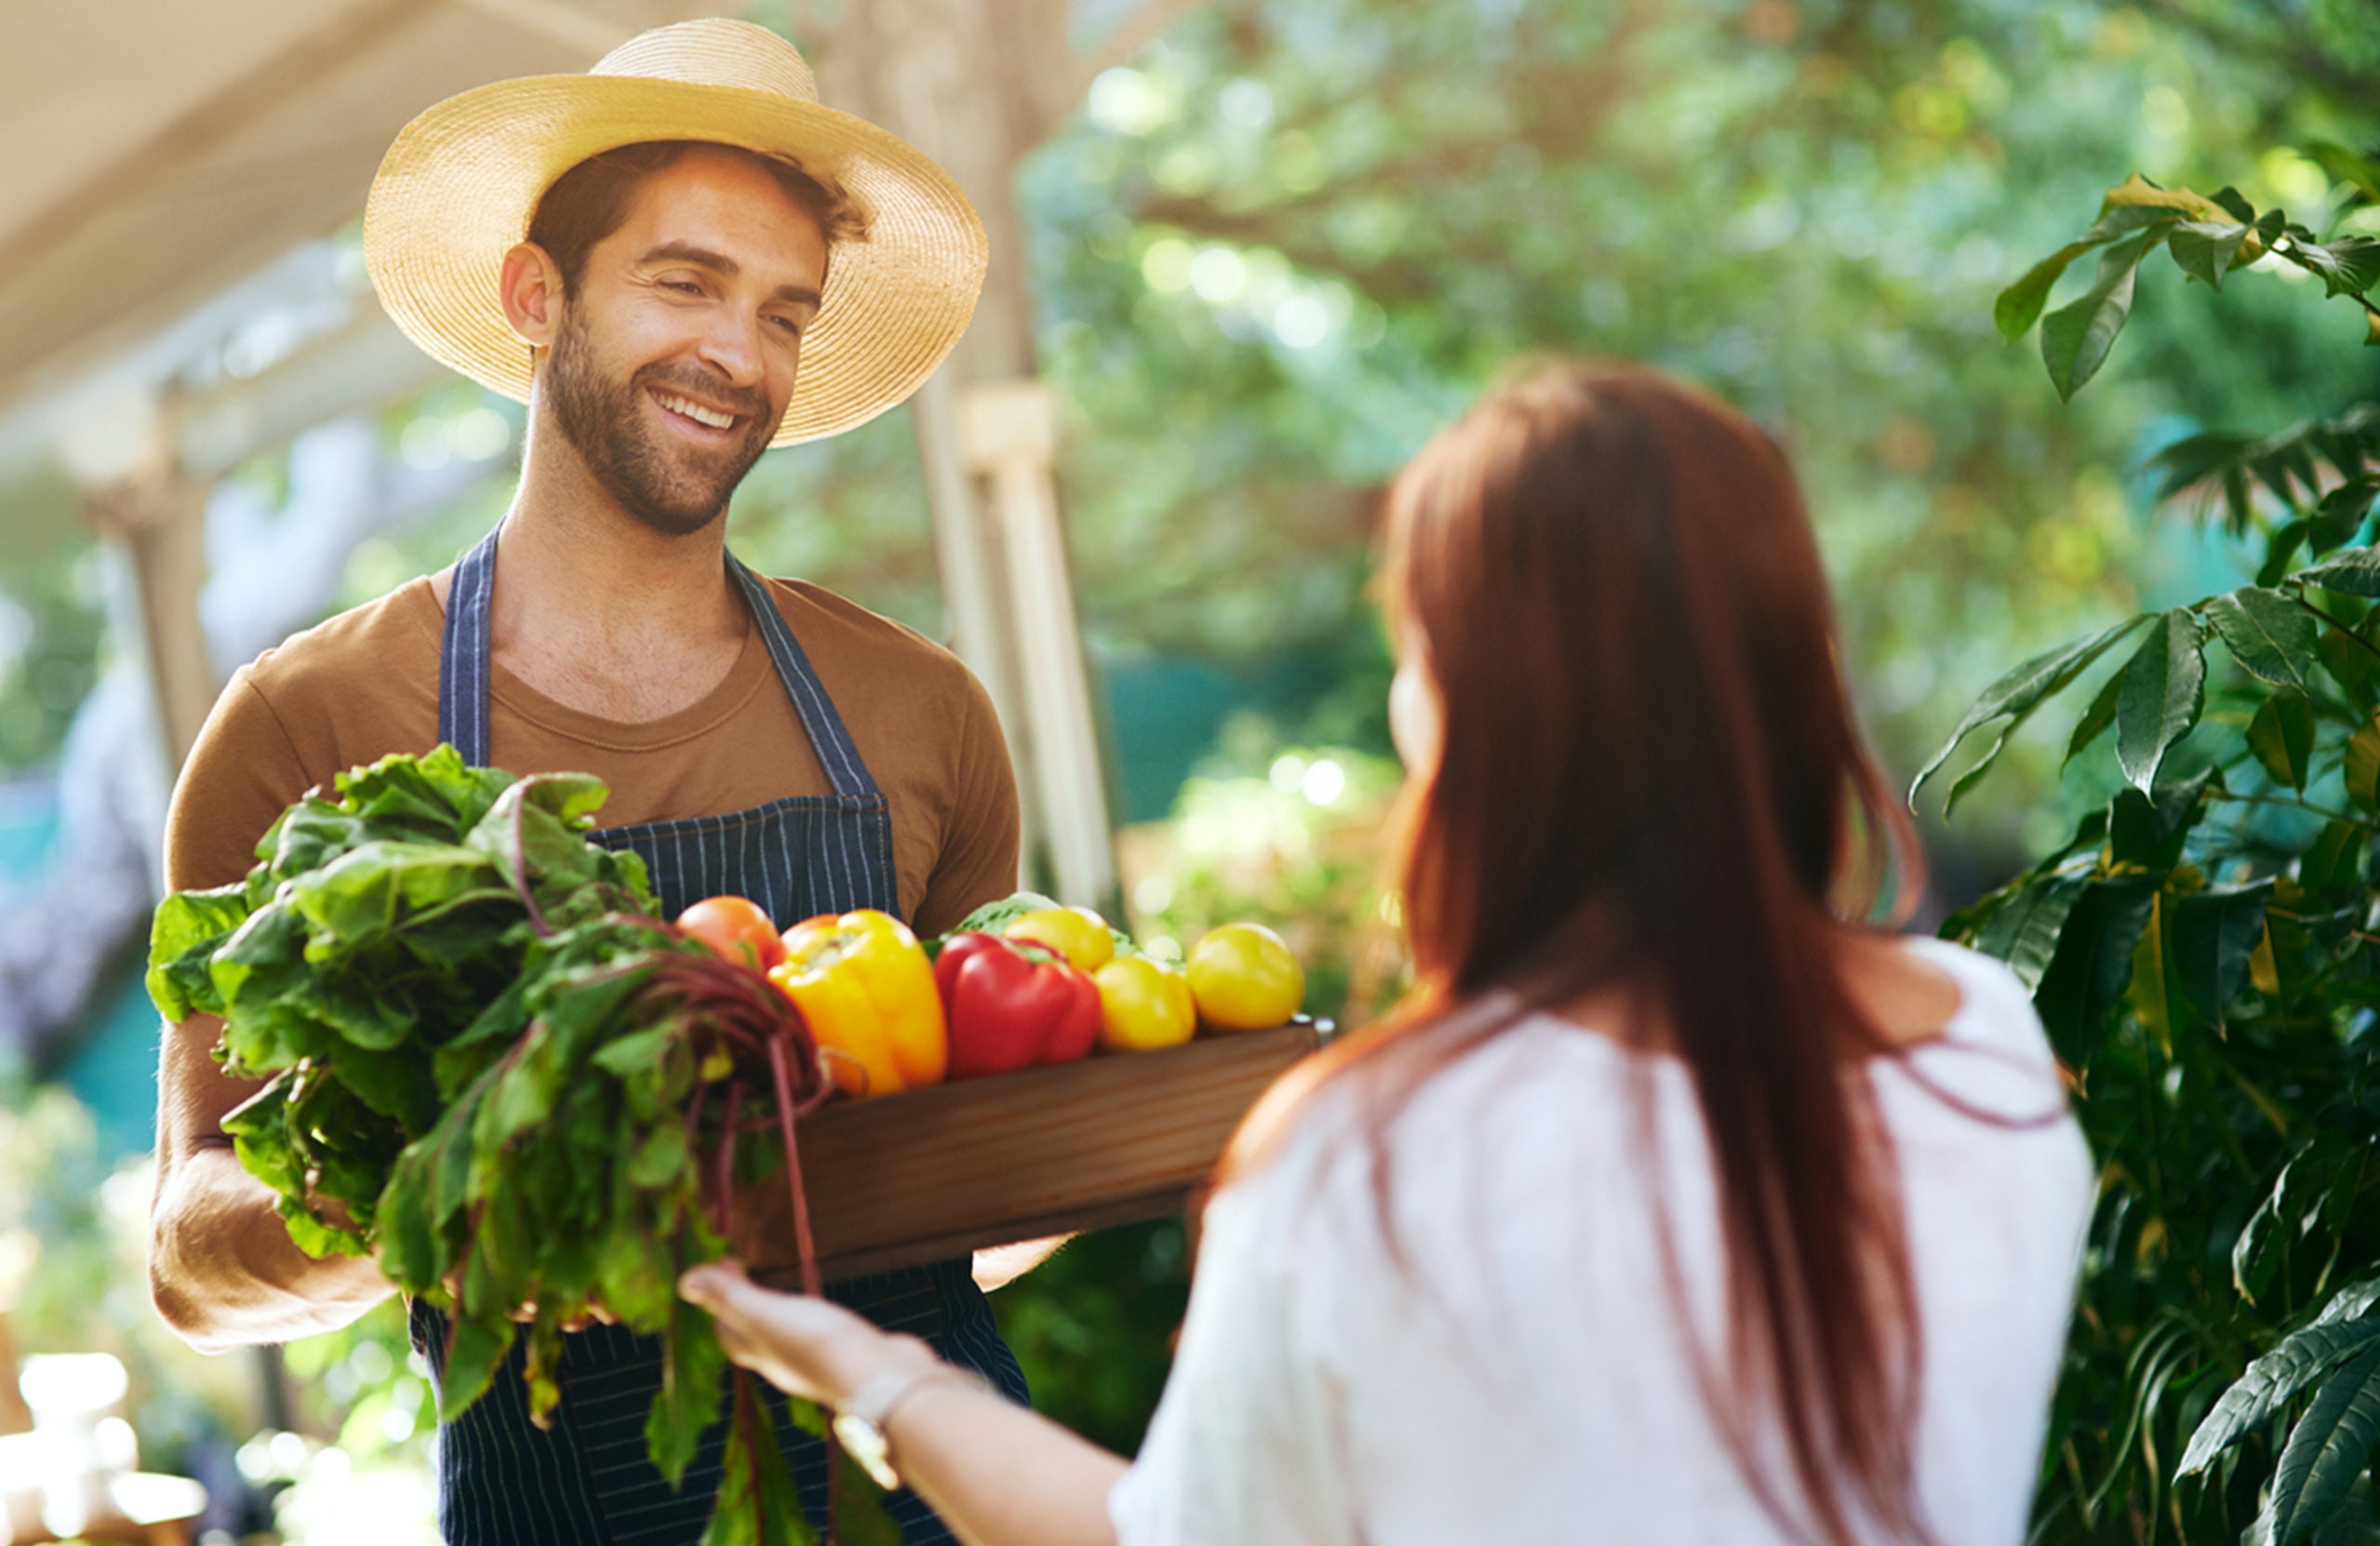 Not all farm-fresh products are created equal. Here's how to make your farmers market work for you.